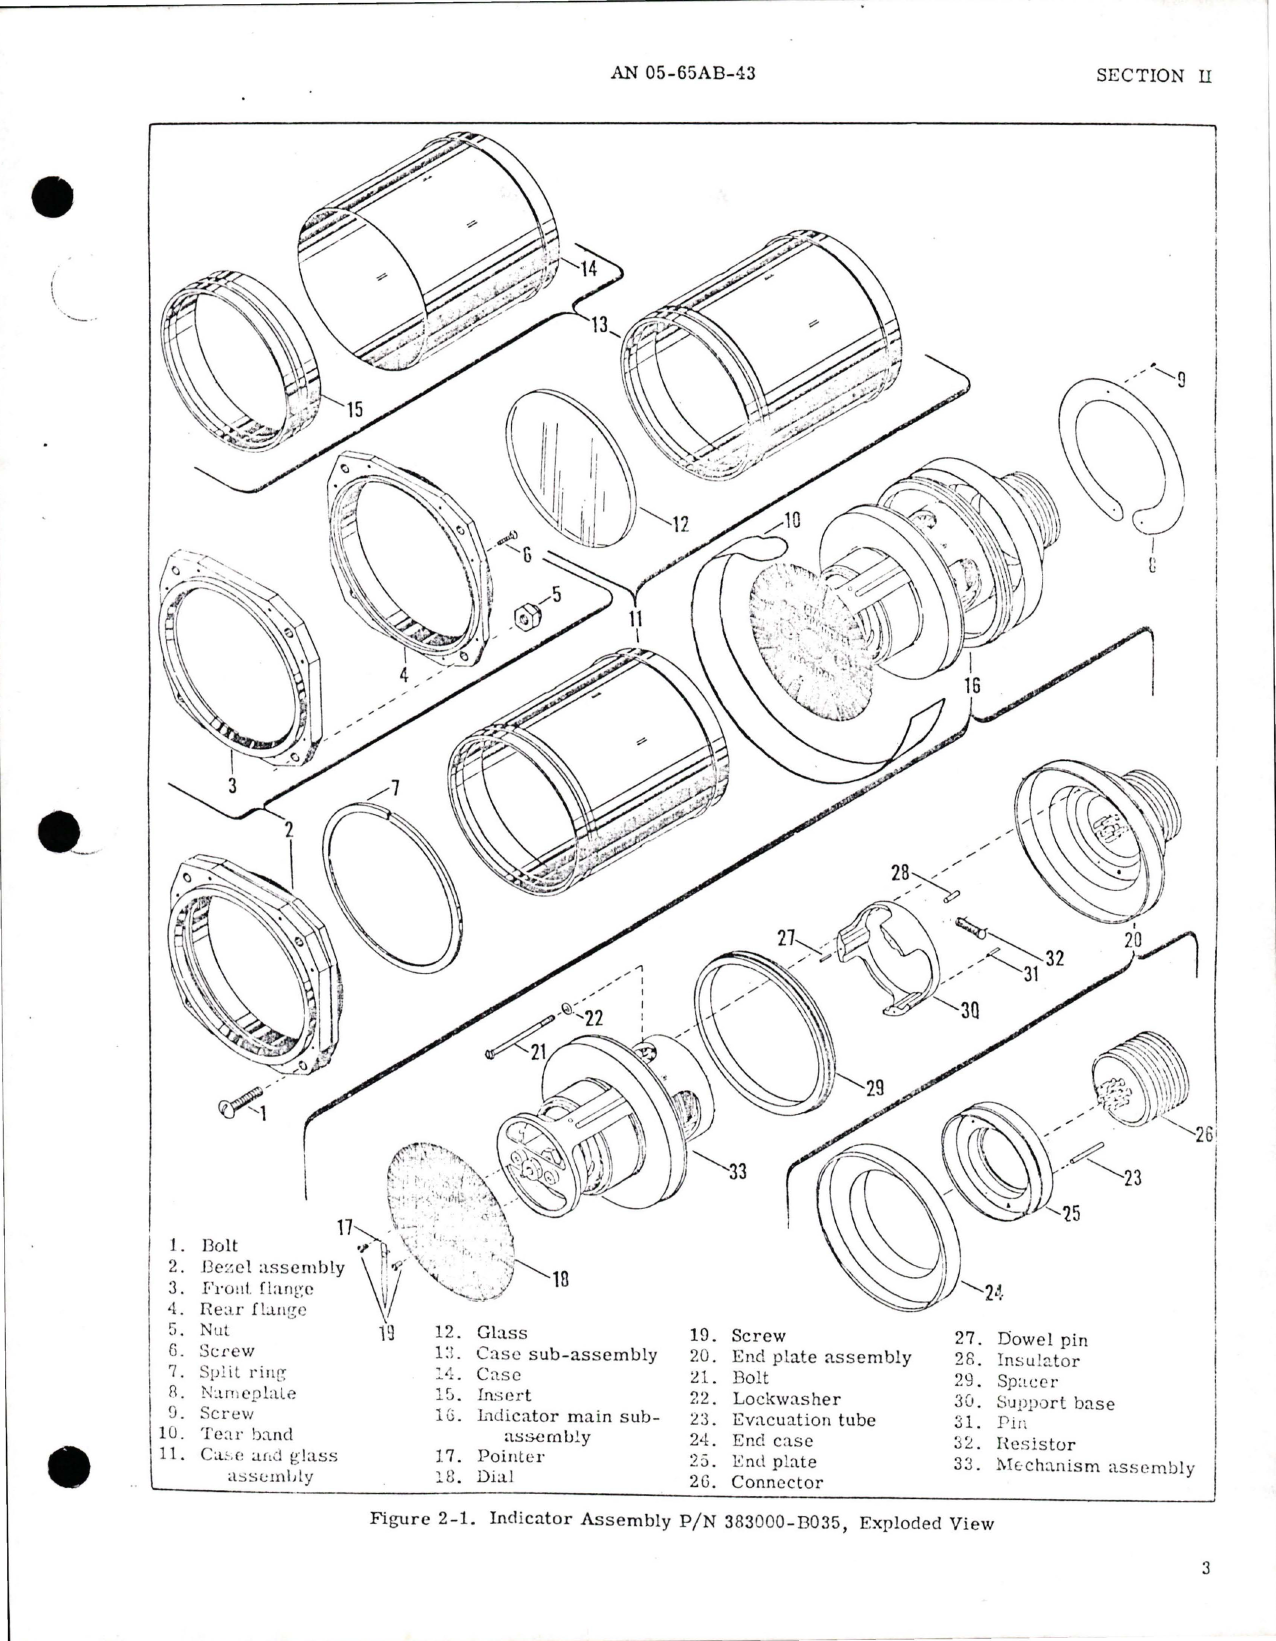 Sample page 7 from AirCorps Library document: Capacitor Fuel Gage System Indicators